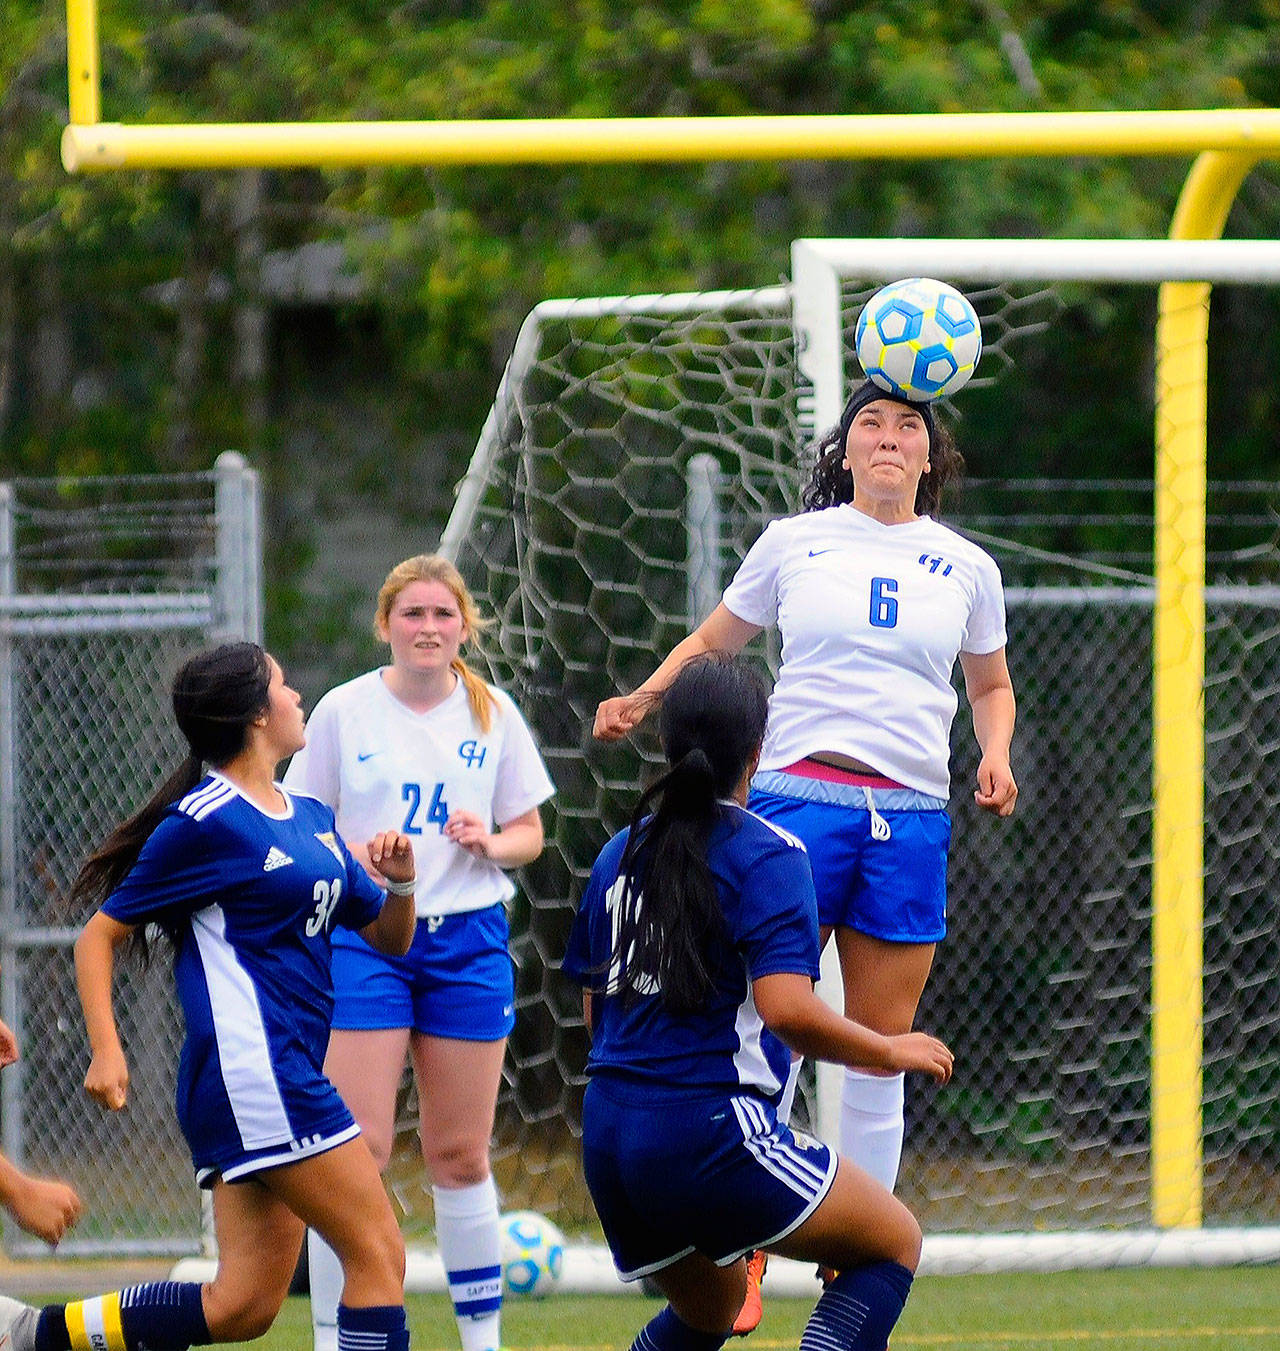 Grays Harbor’s Kayla Delahanty gets her head on the ball to clear it away from the 18-yard box at in the Choker’s friendly match against Portland on Wednesday at Stewart Field. (Hasani Grayson | Grays Harbor News Group)